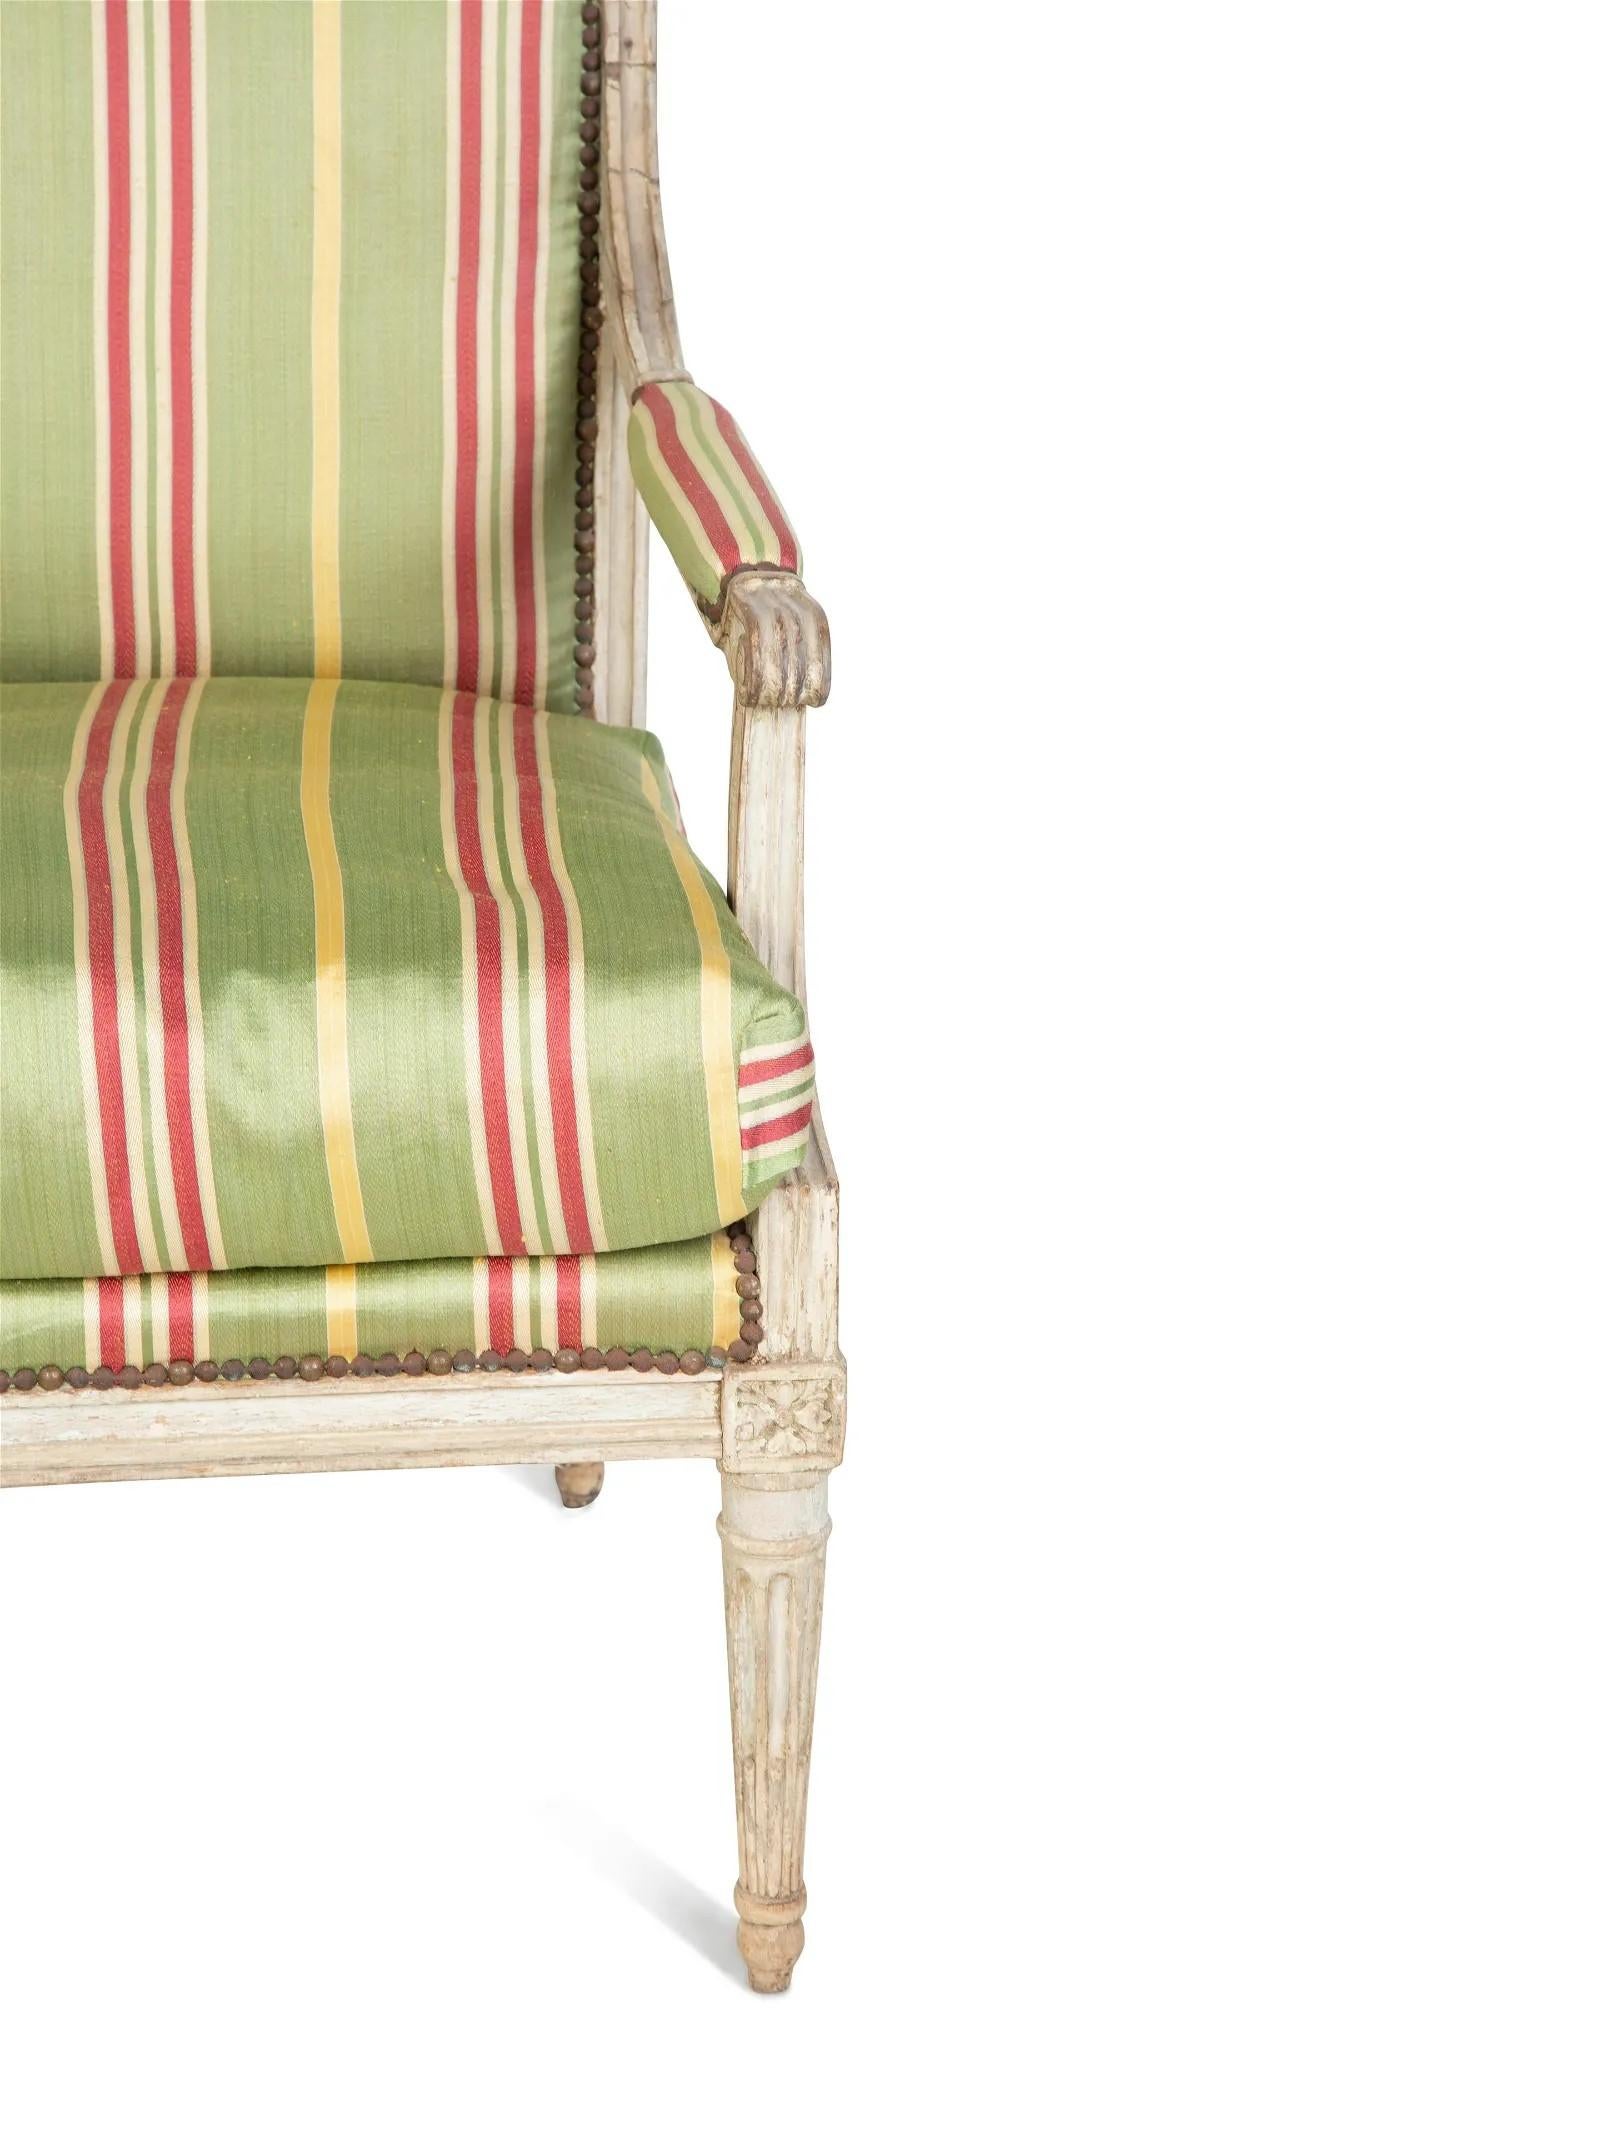 French 18th Century Louis XVI Fauteuil in Original Painted Finish For Sale